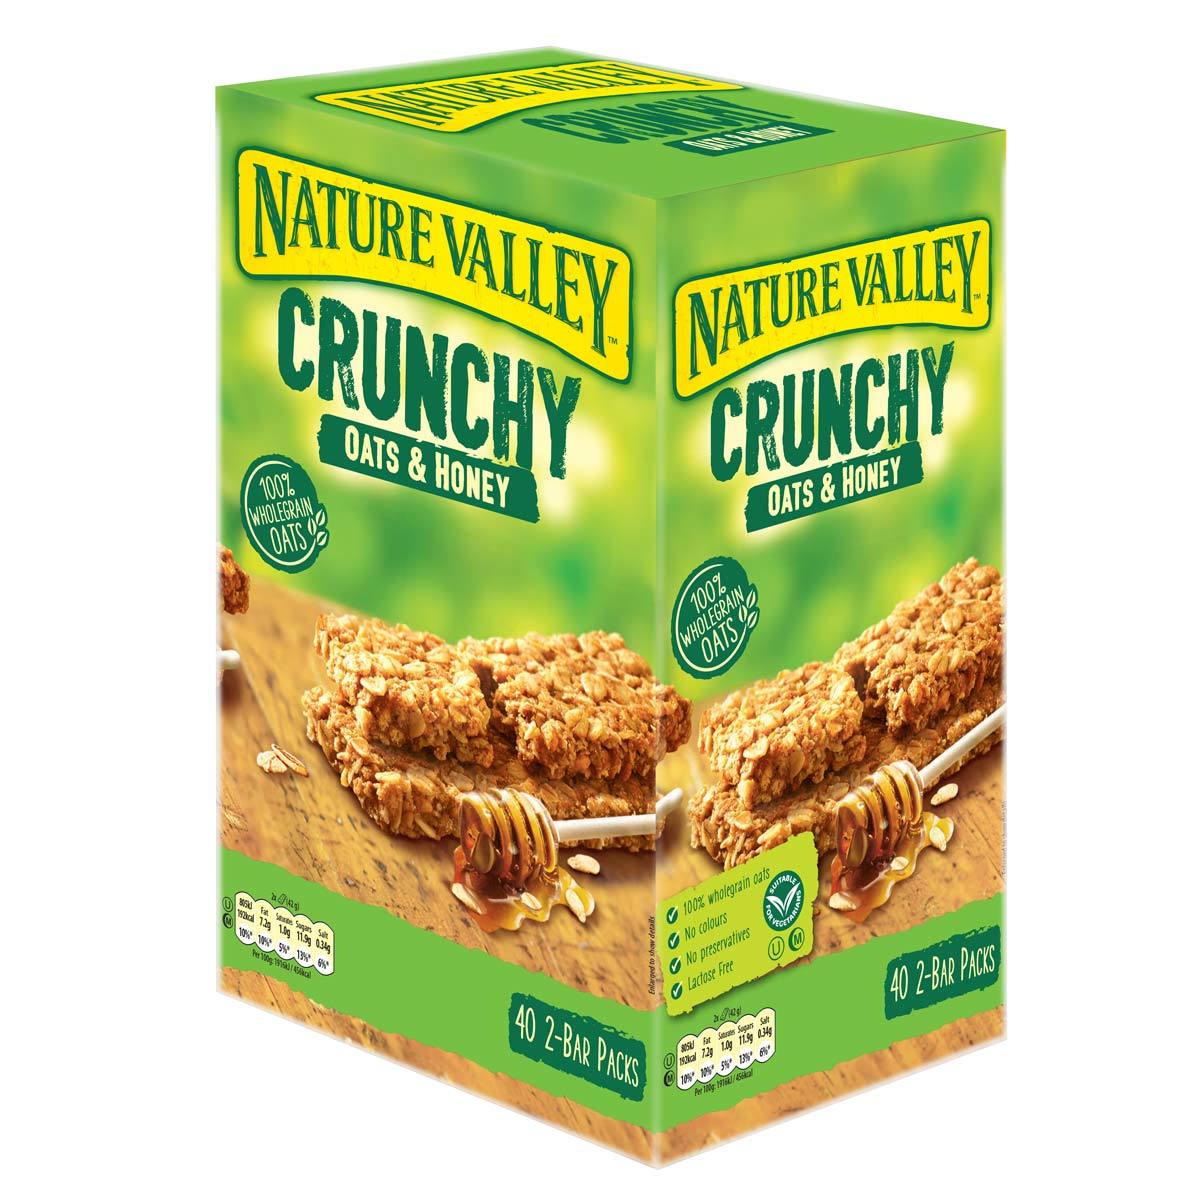 Image of Nature Valley Hney & Oats Box on white background